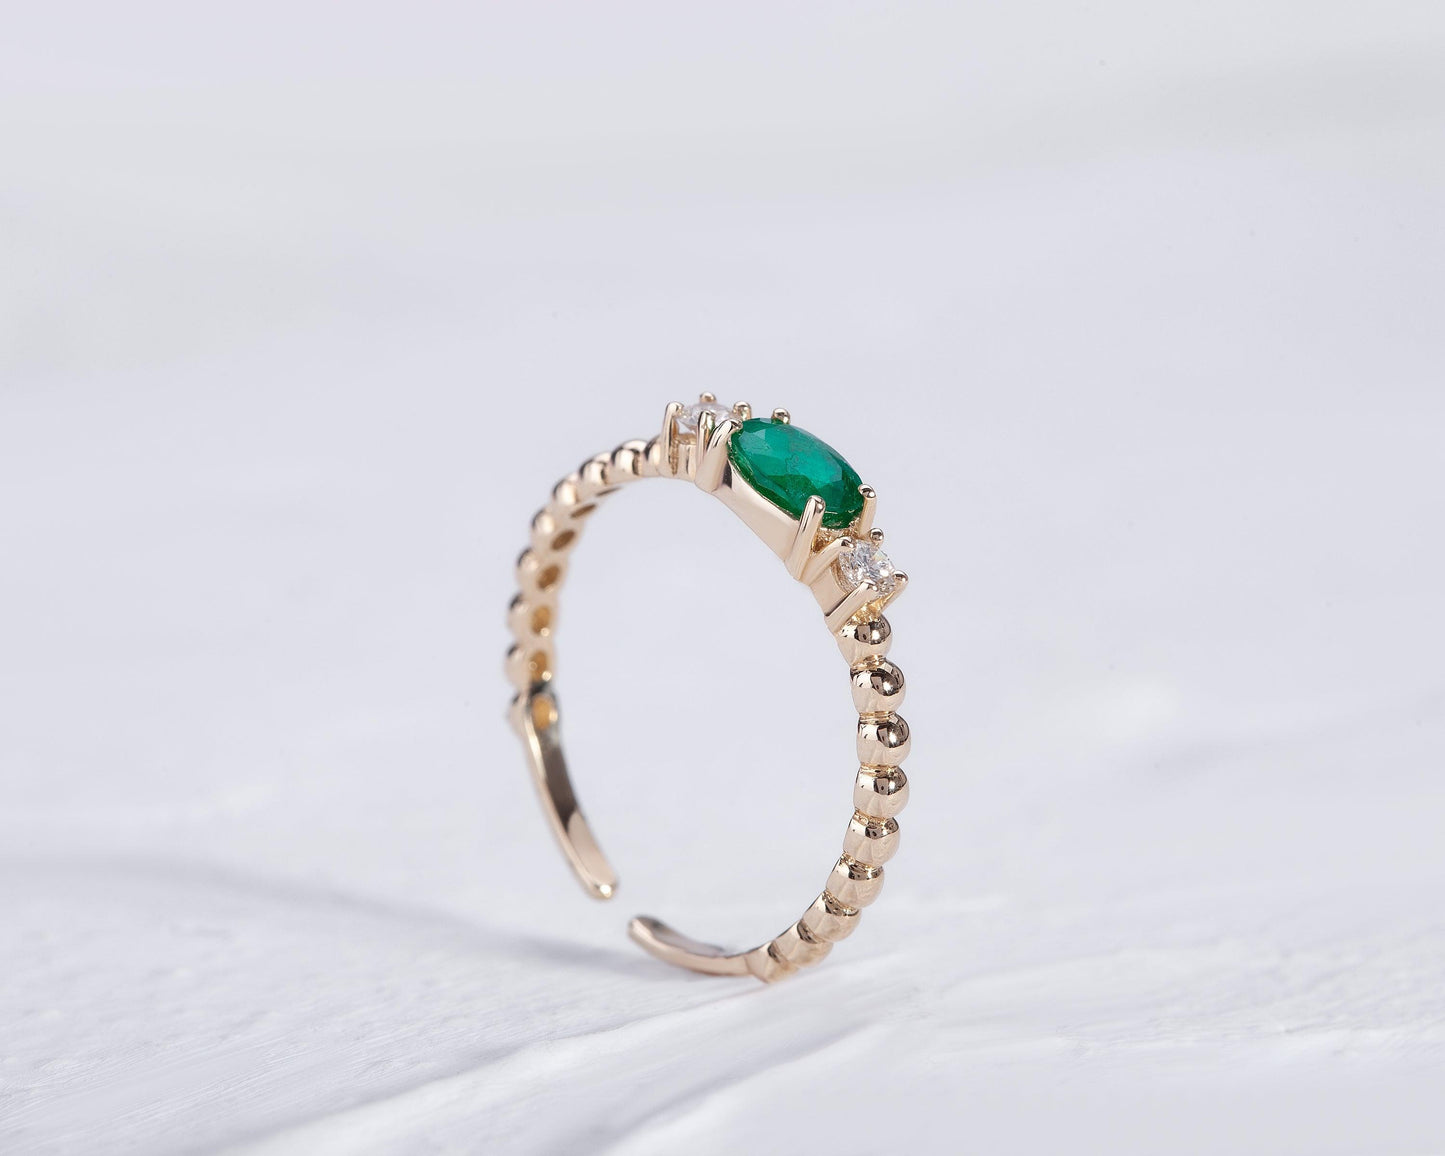 Adjustable Dainty Ring Oval Cut With Emerald and Diamond for her